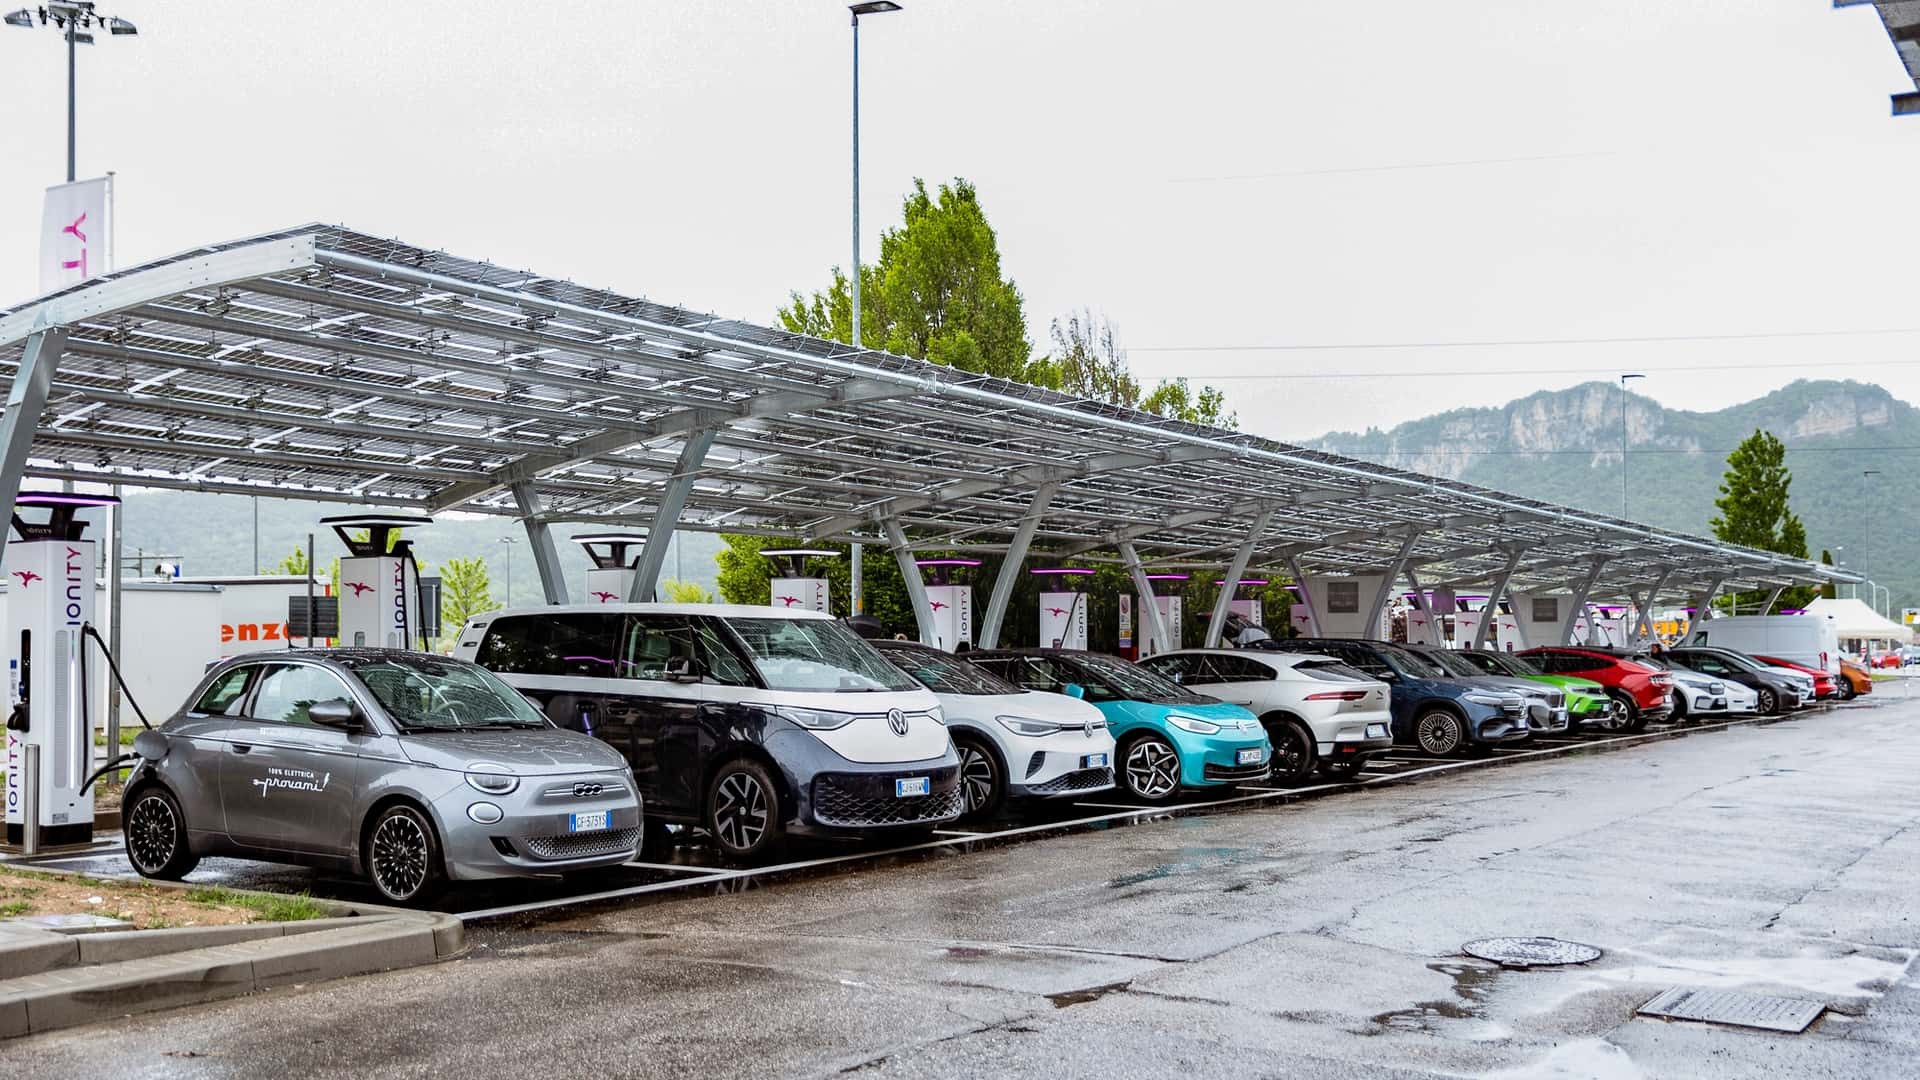 EV Registrations In Europe Surpassed Diesel For The First Time Unveiled: Uncover Auto Excellence at Autoxyon